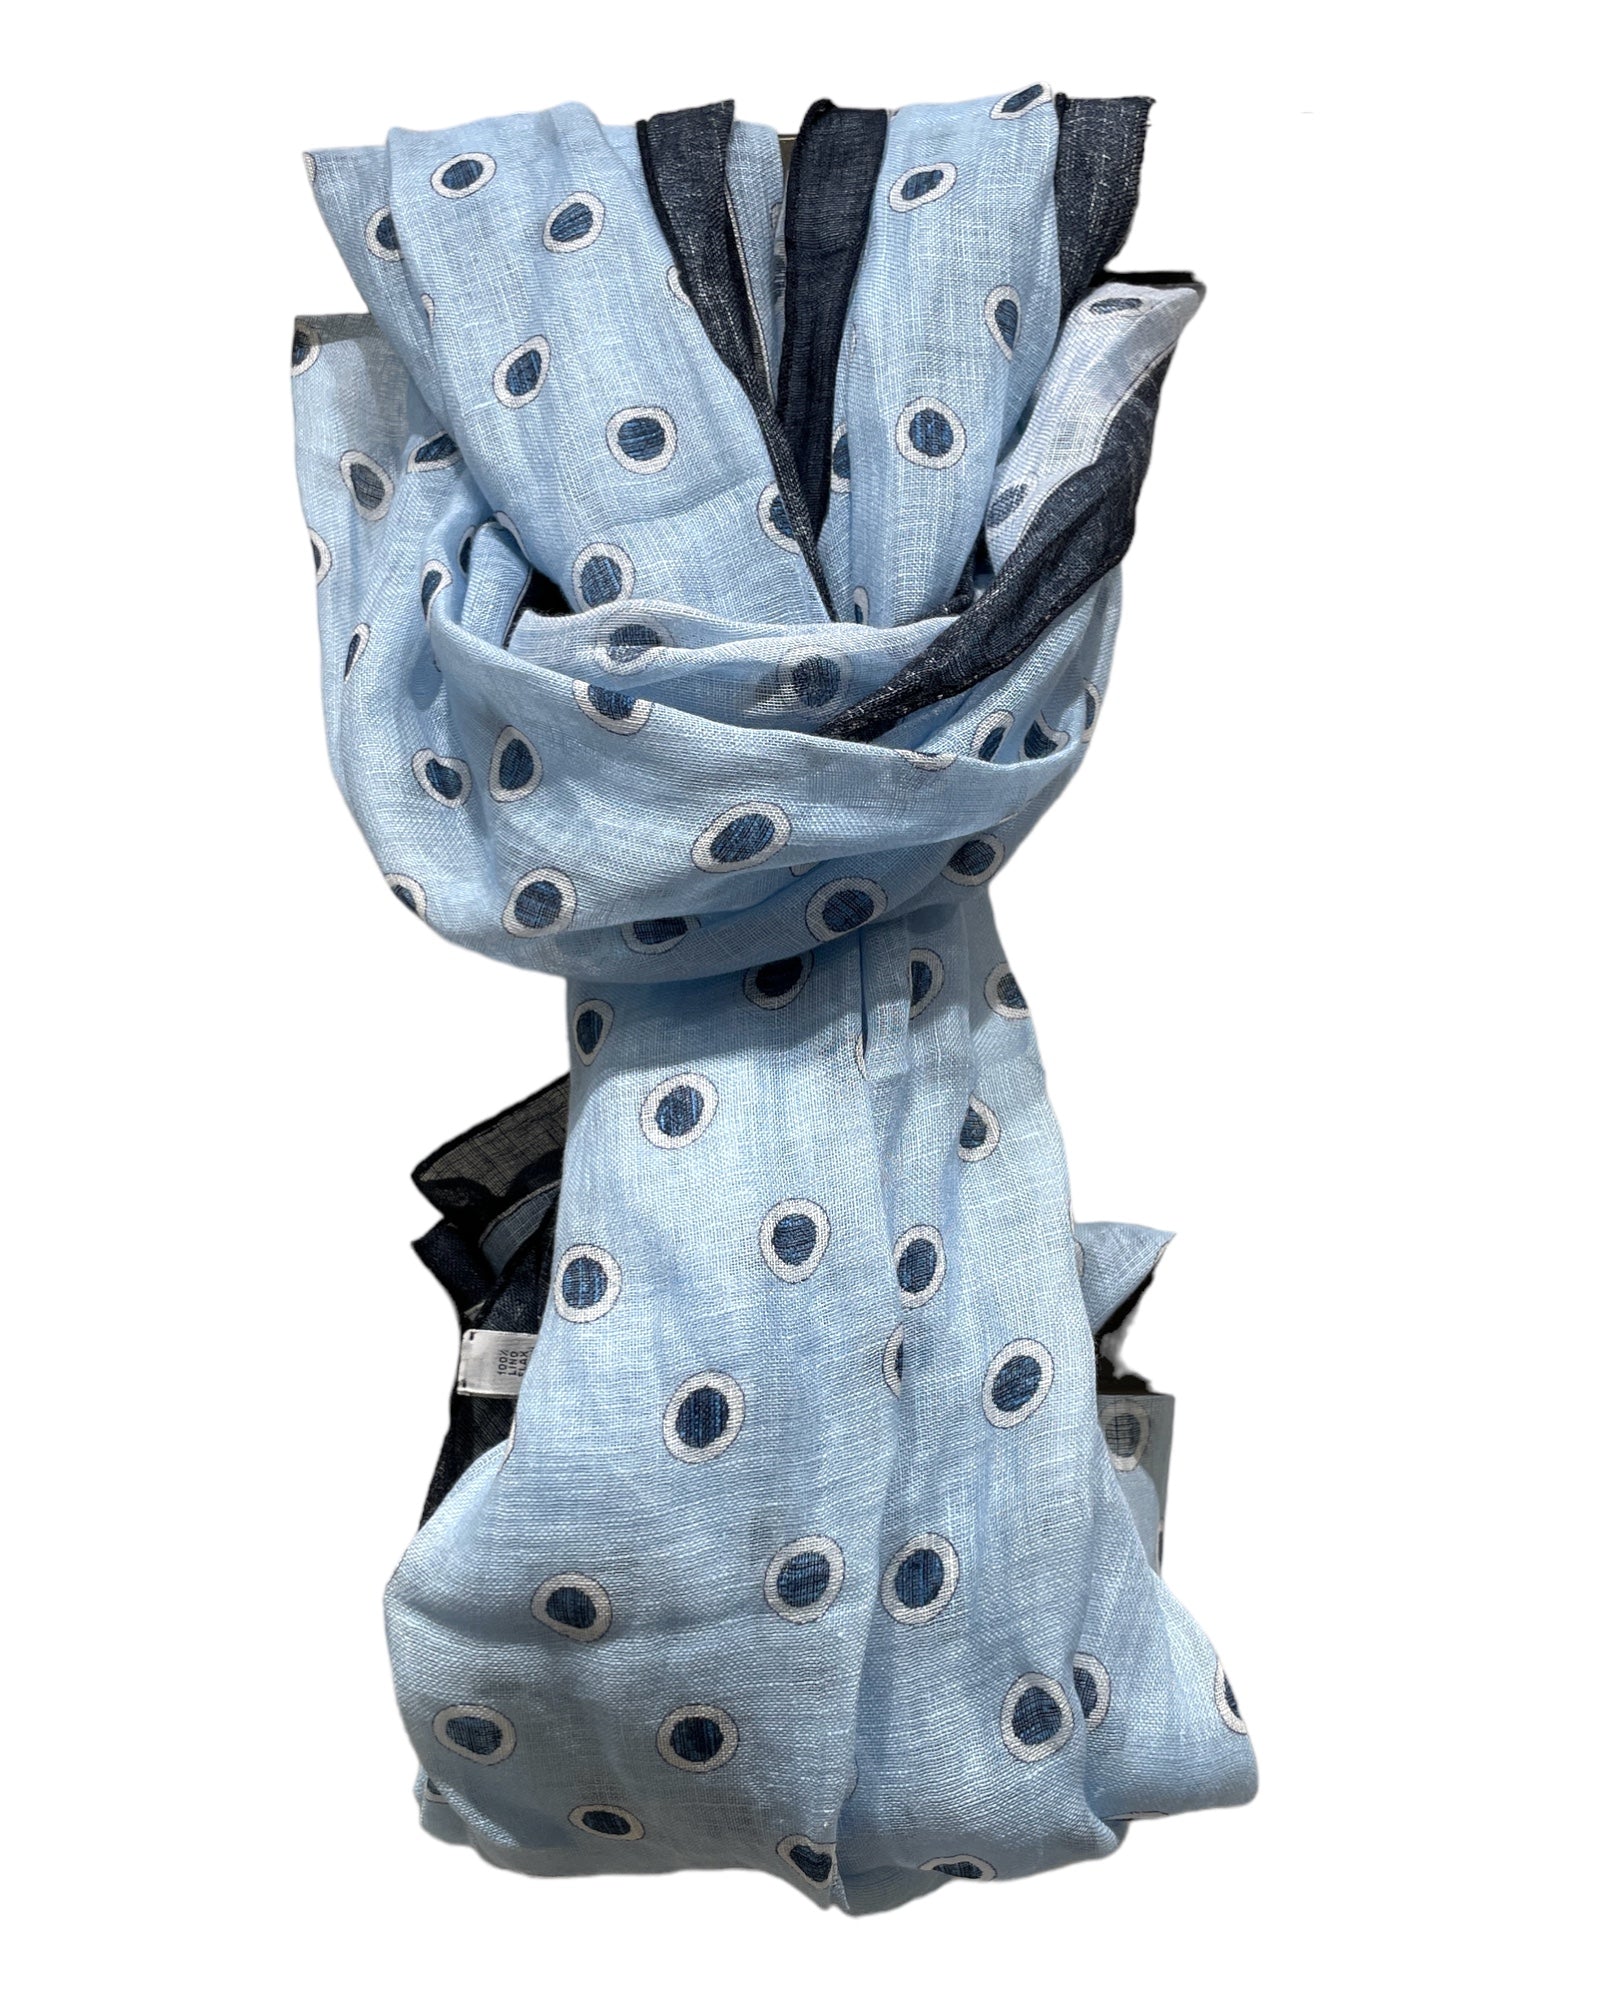 Linen Scarf - Blue with Dark Blue Circles SCARVESMember Price $225